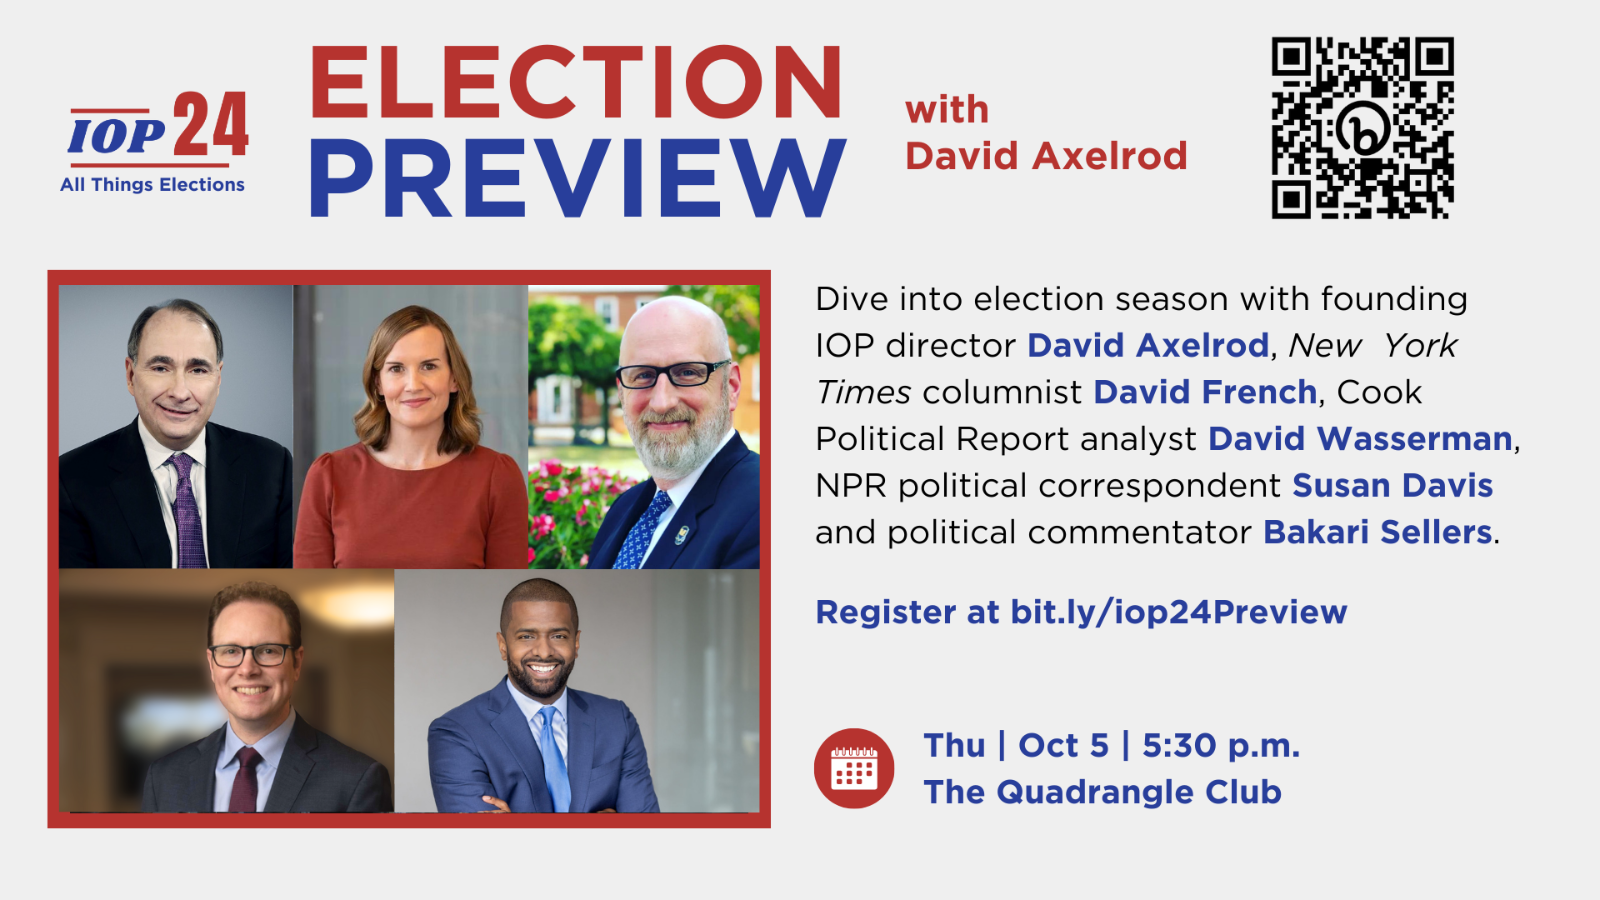 Election Preview with David Axelrod